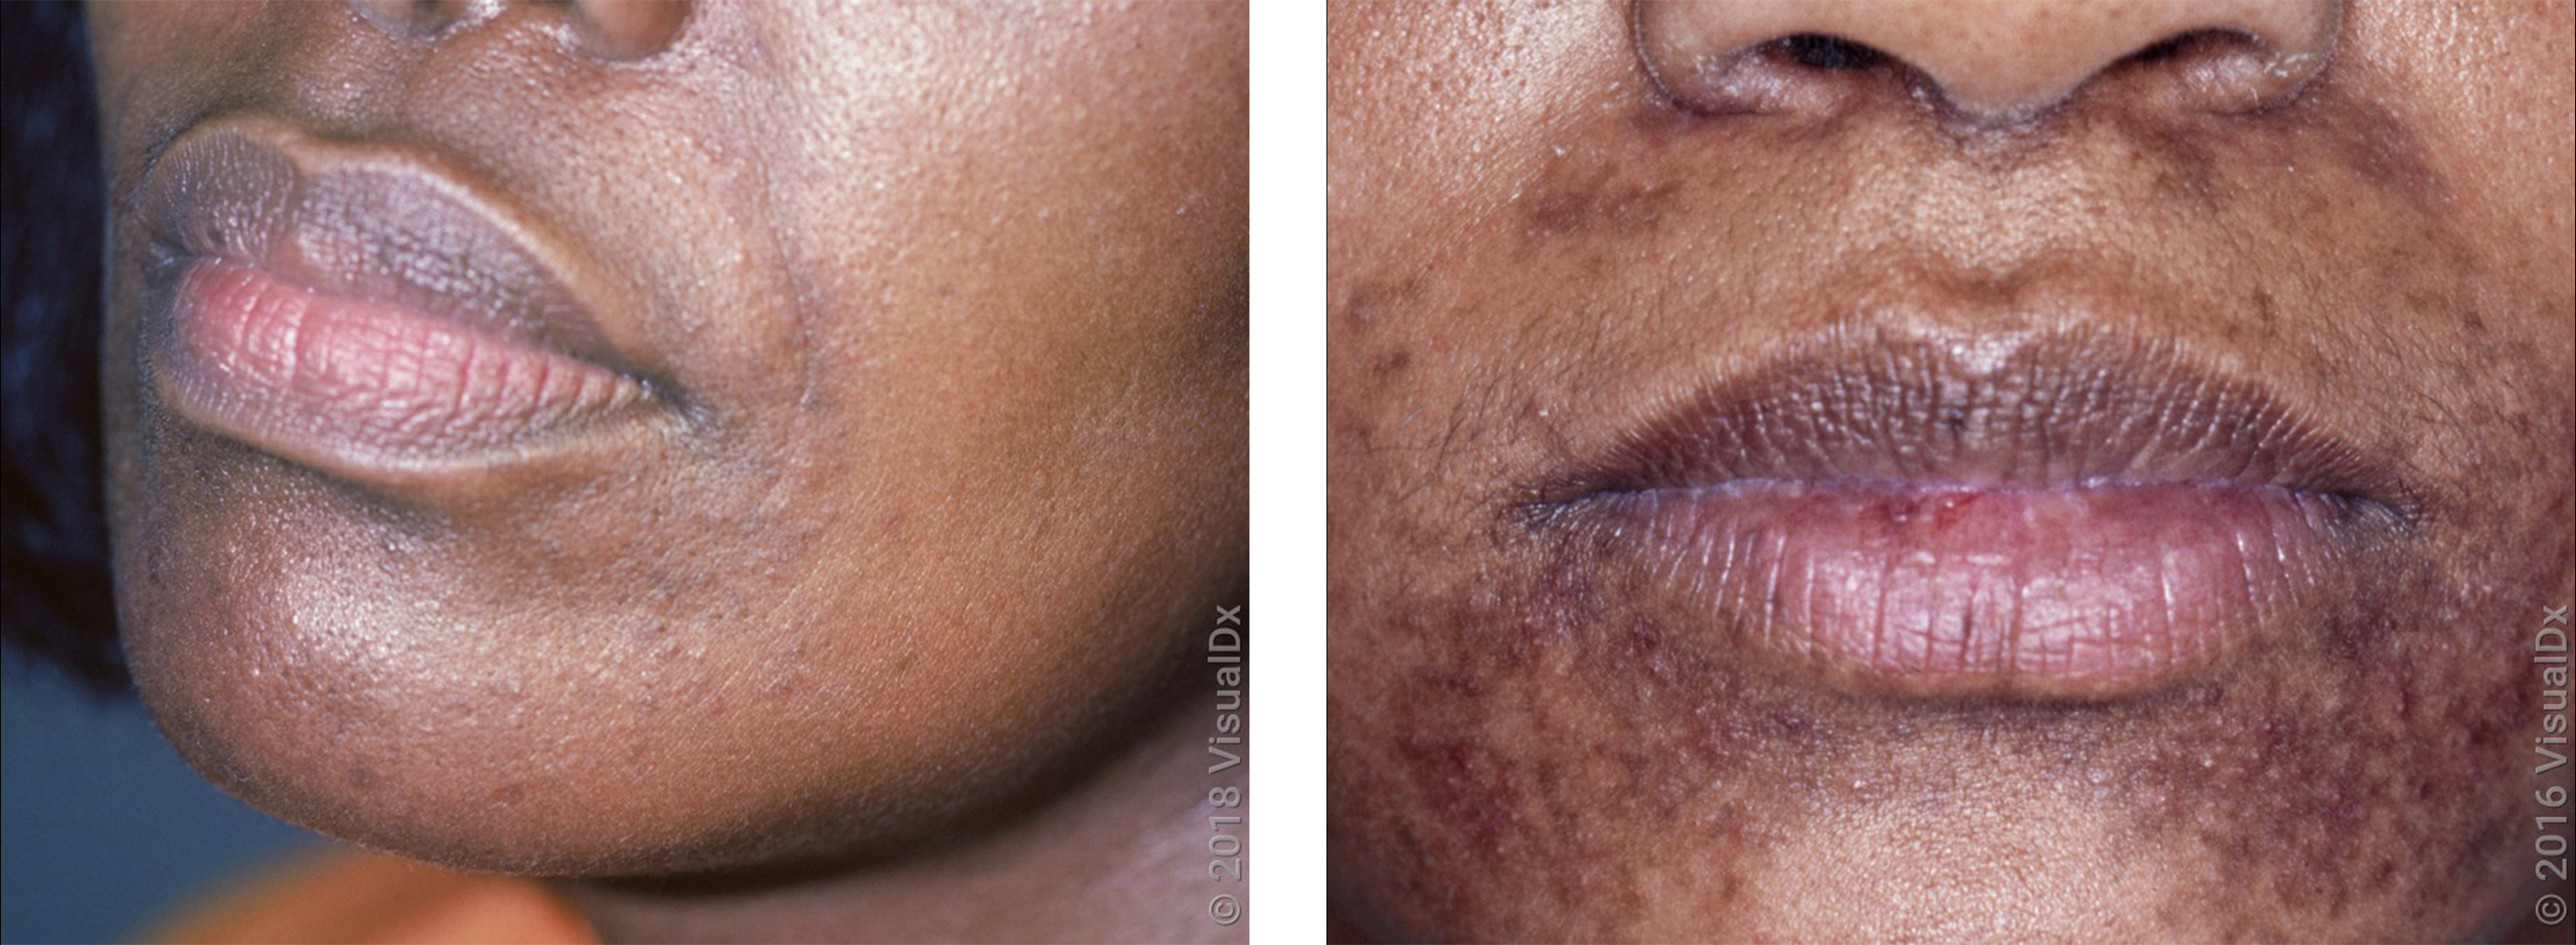 Left: Faint and small brown-purple bumps around the mouth in perioral dermatitis. Right: Small, violet and brown bumps around the mouth with some flat brown patches in perioral dermatitis.